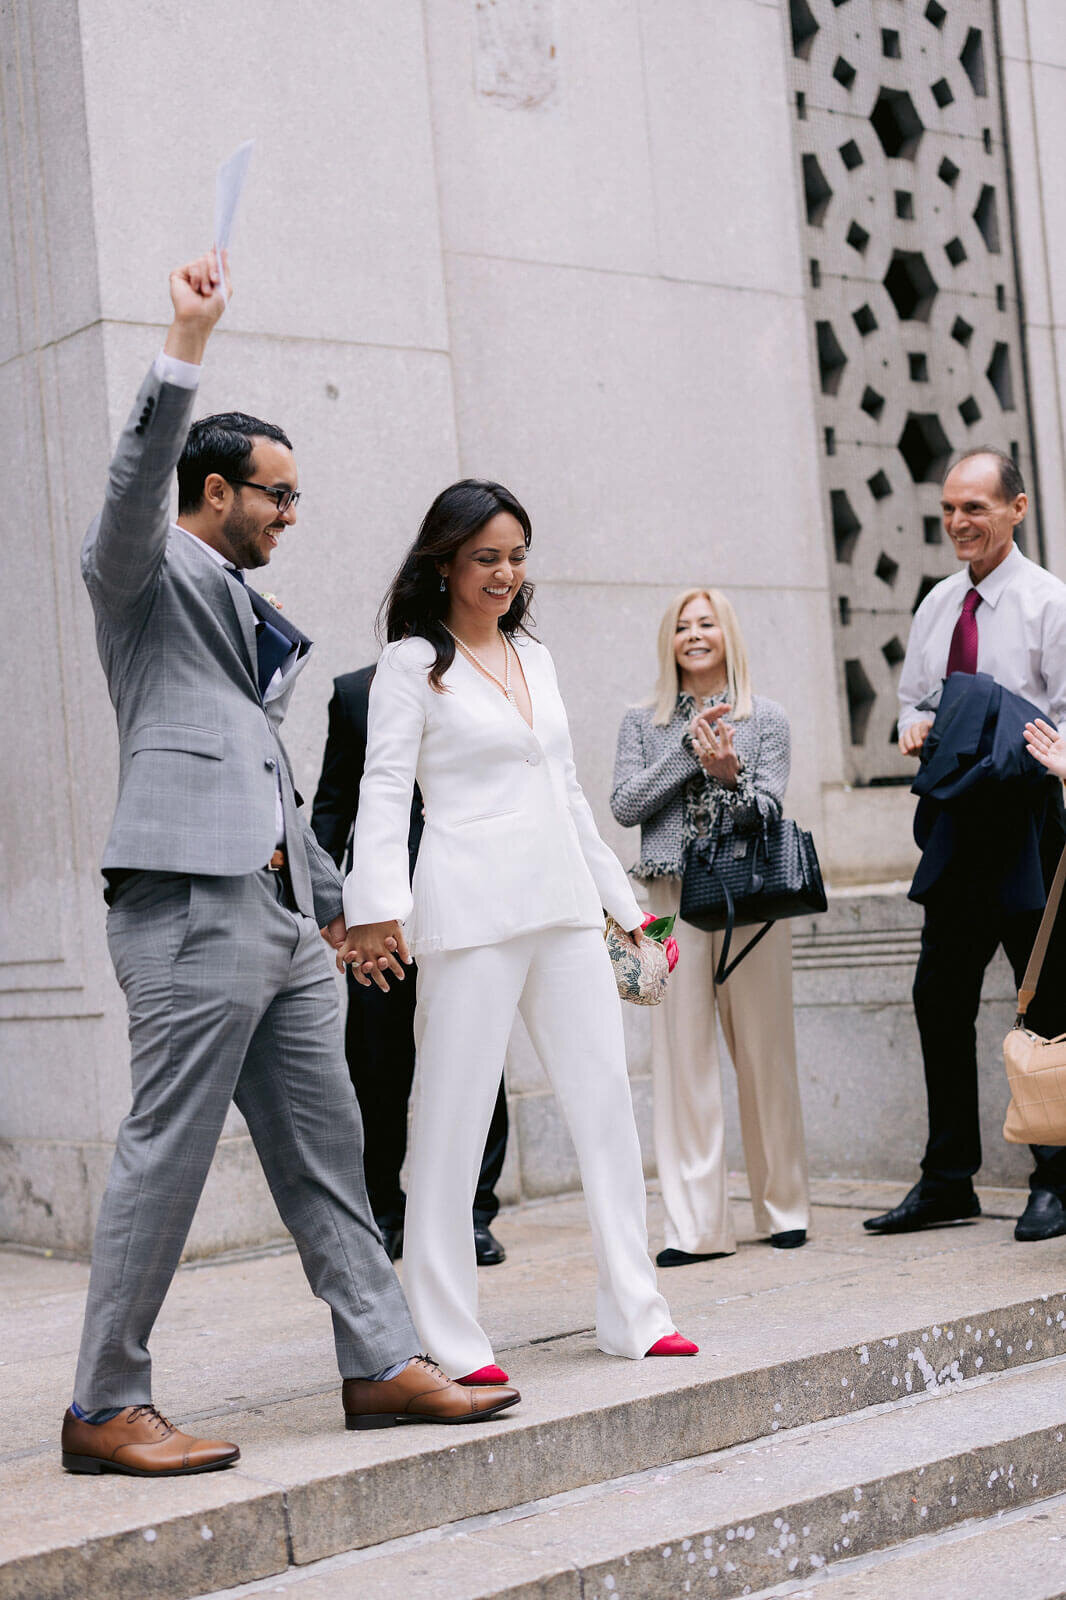 The bride and groom, walking hand in hand, happily exited NY City Hall, as their friends happily watch. Image by Jenny Fu Studio